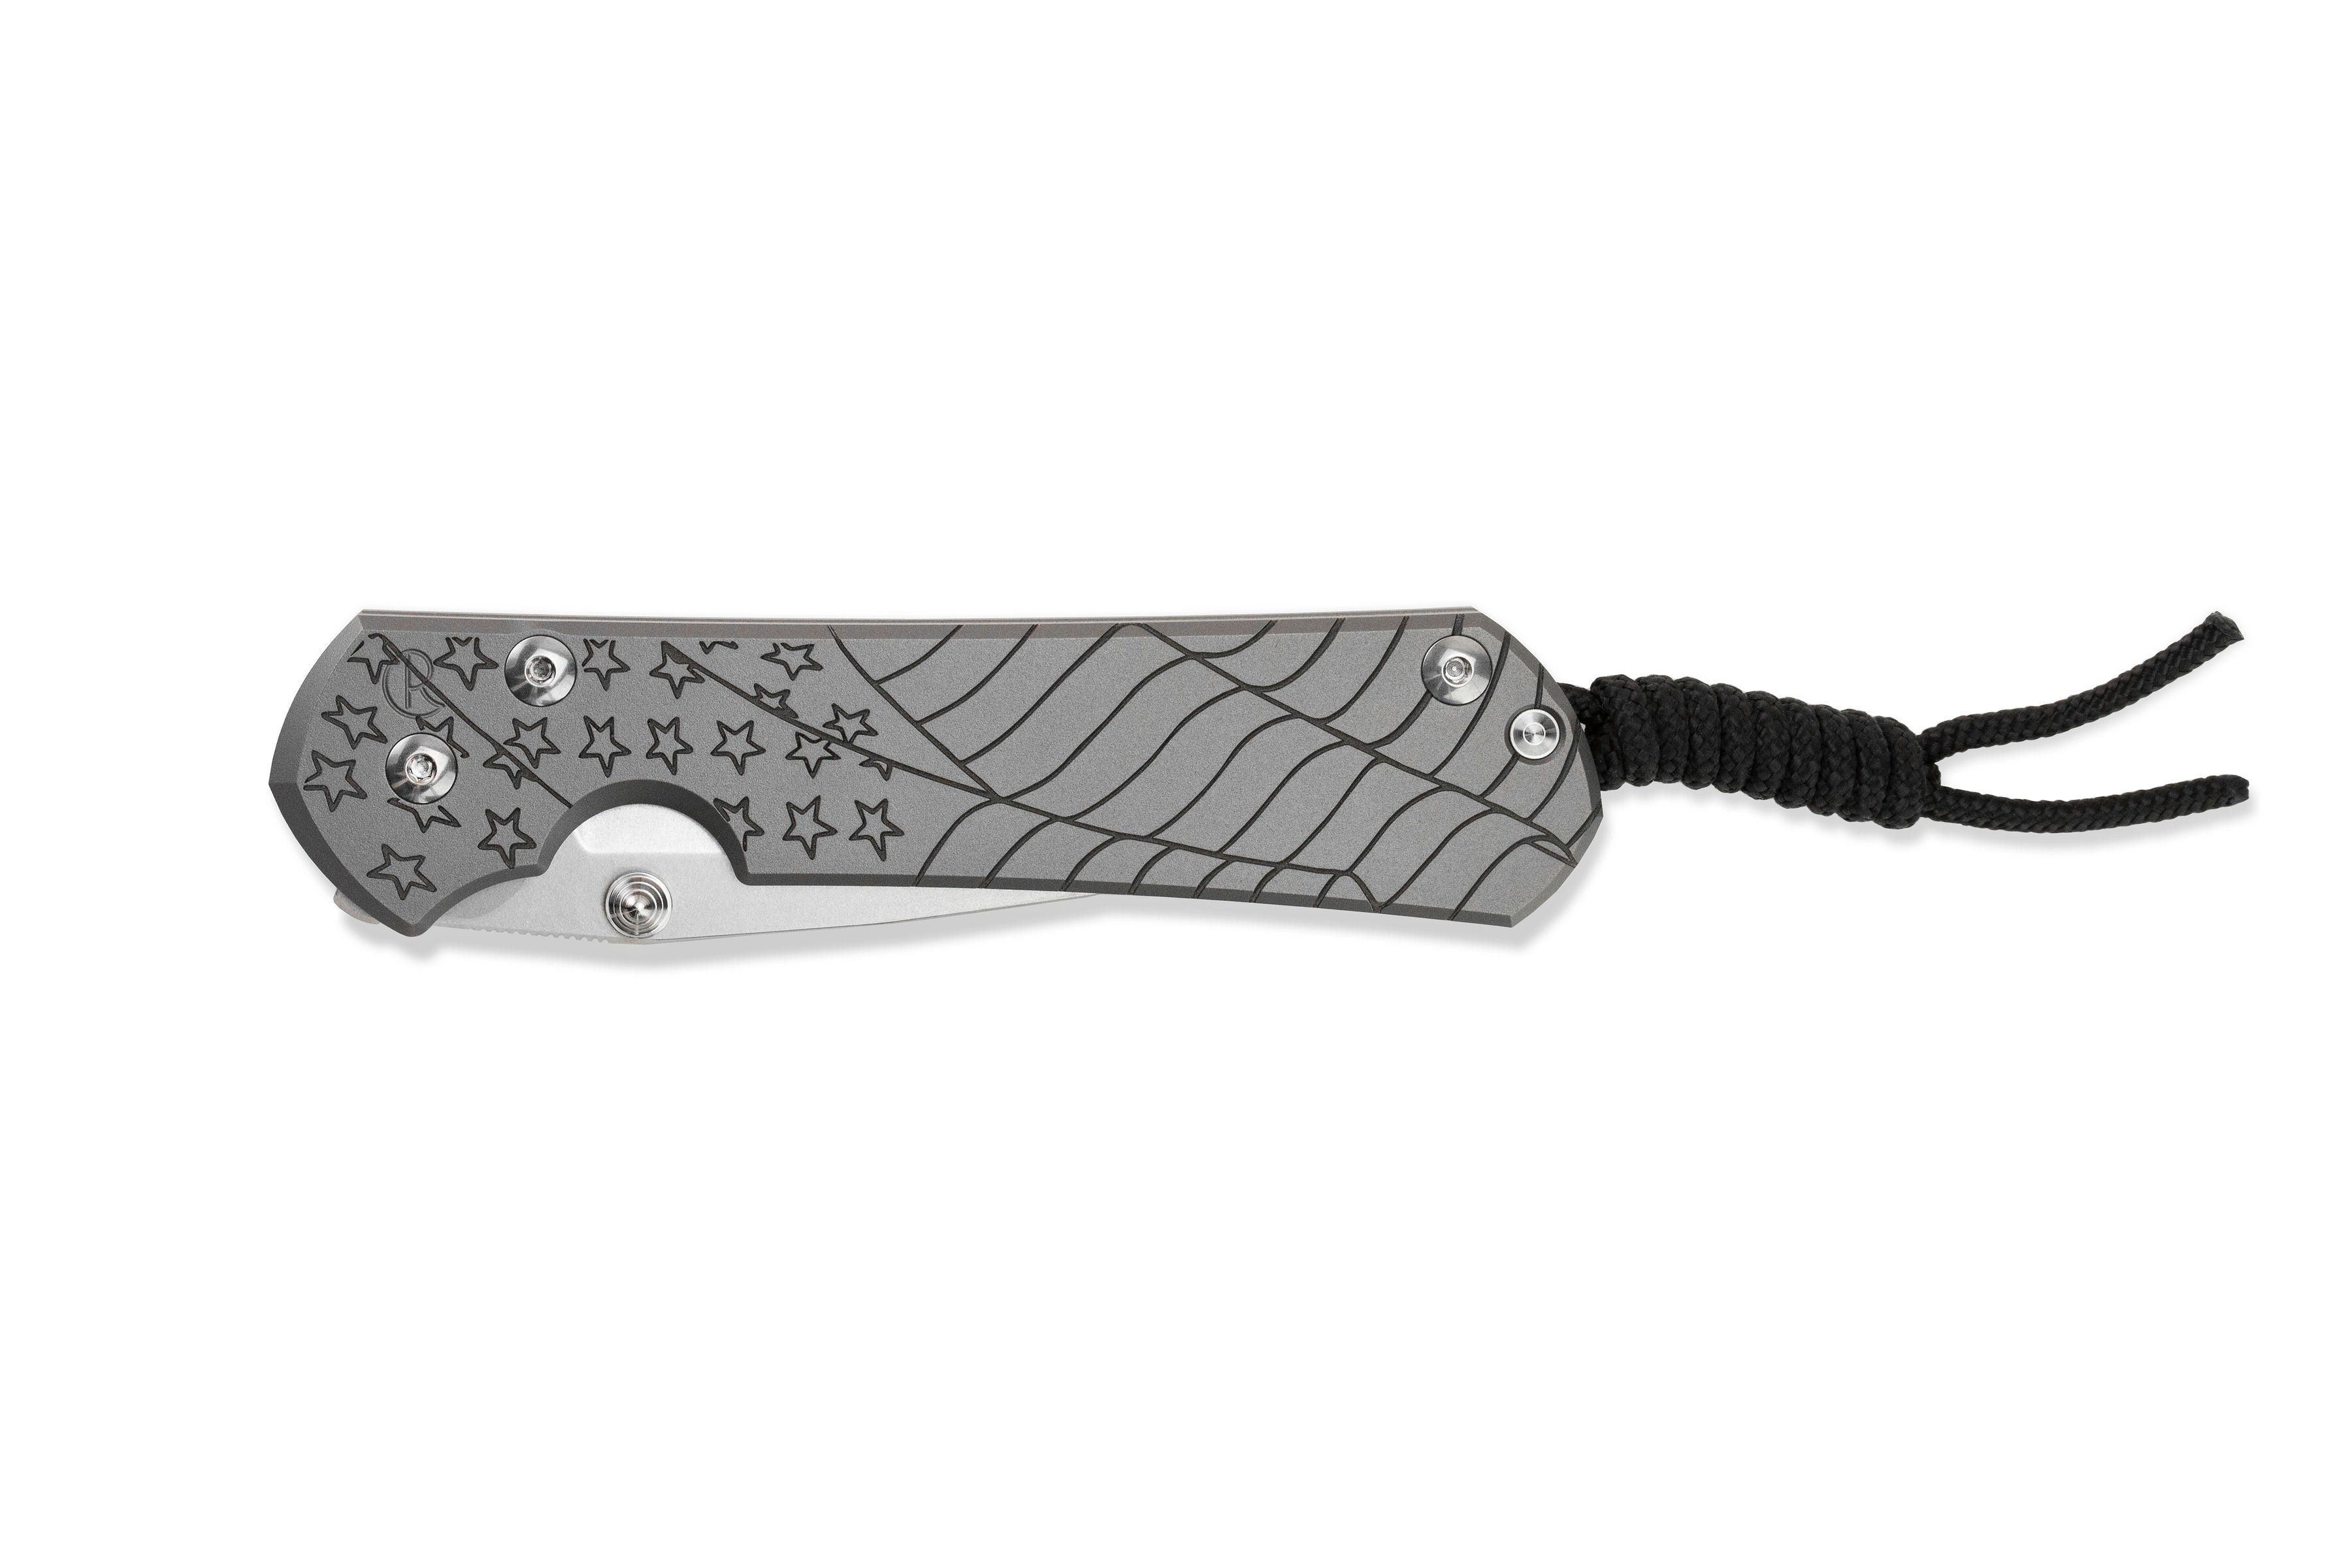 Chris Reeve - Large Sebenza 31 LEFT Handed - 2022 CGG "Forever Flag" - Drop Point - Glass Blasted - L31-1691